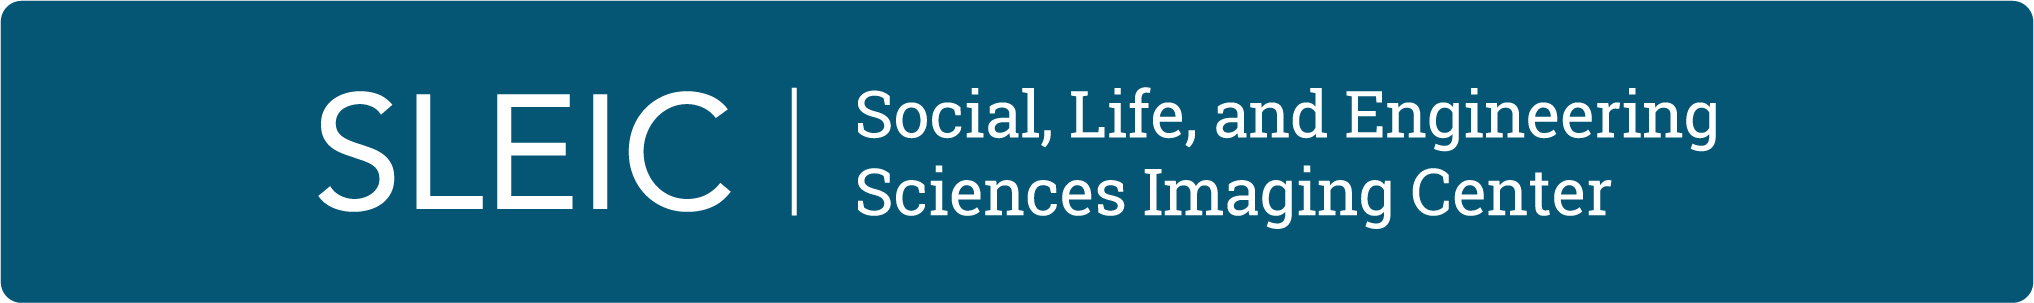 SLEIC | Social, Life, and Engineering Sciences Imaging Center